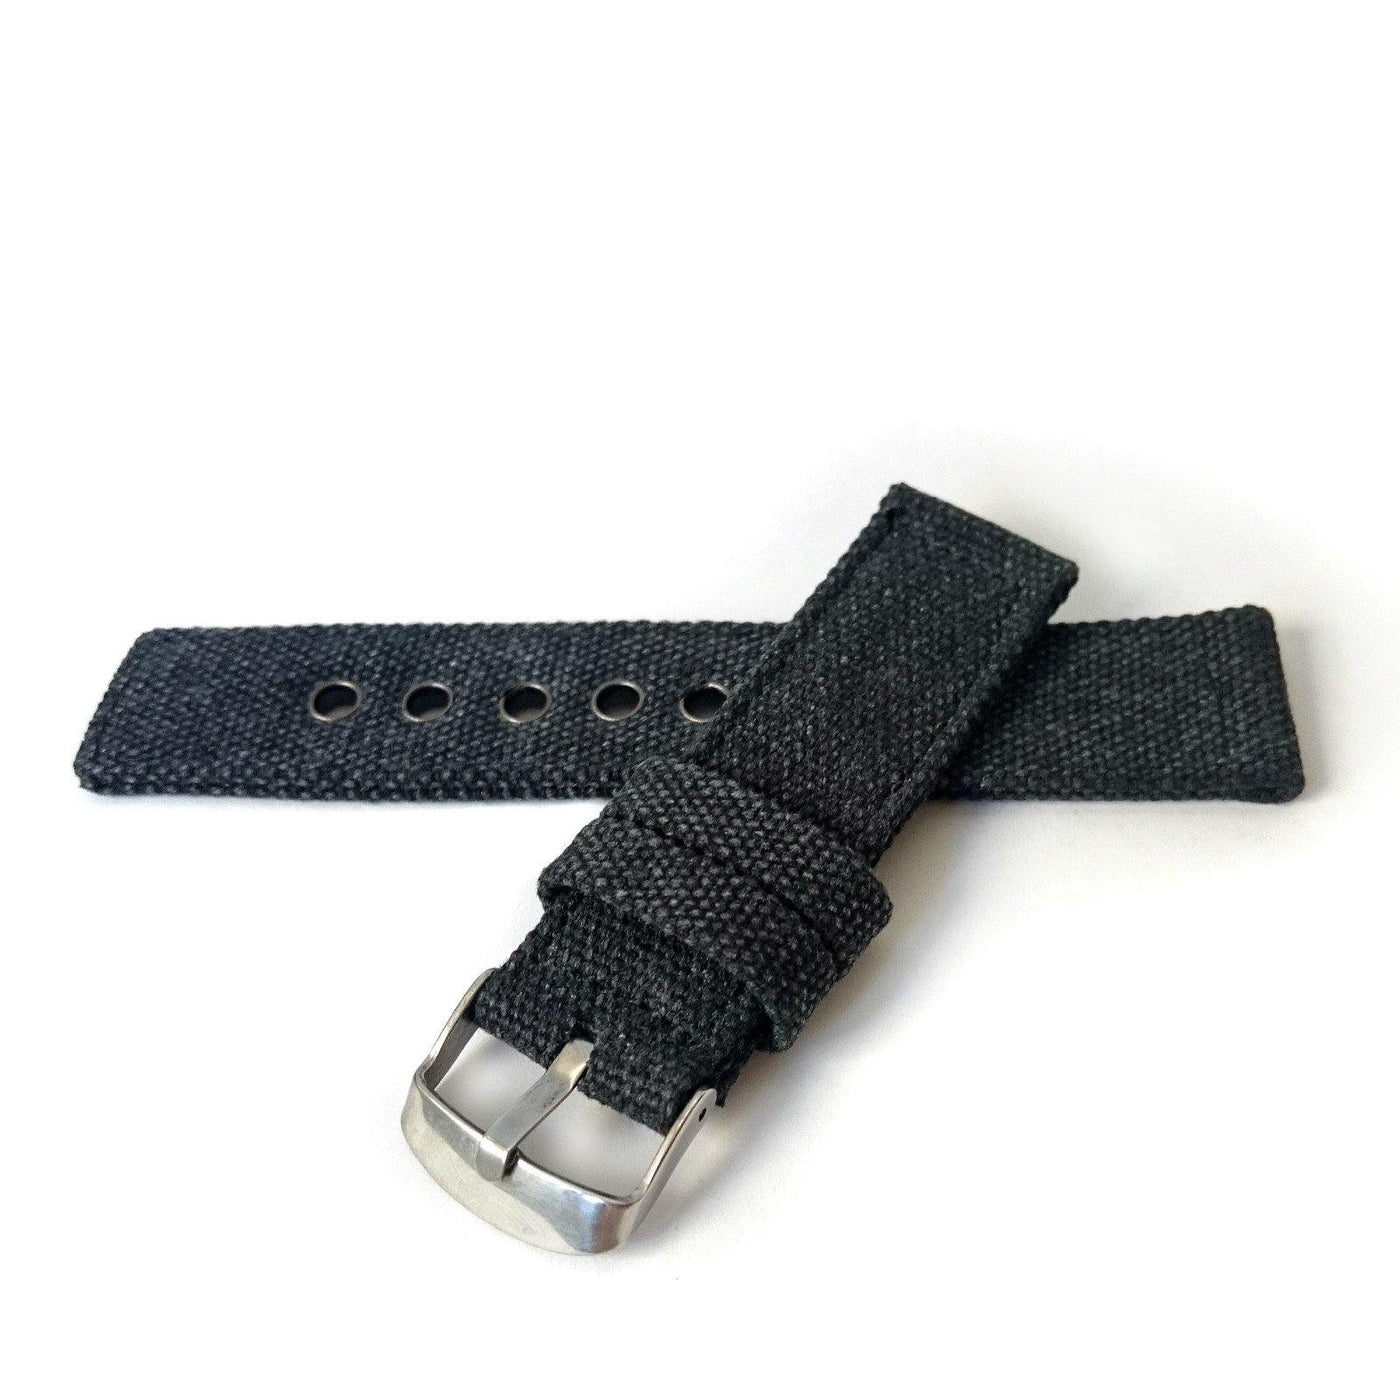 RUGGED CANVAS CHARCOAL - The Sydney Strap Co.